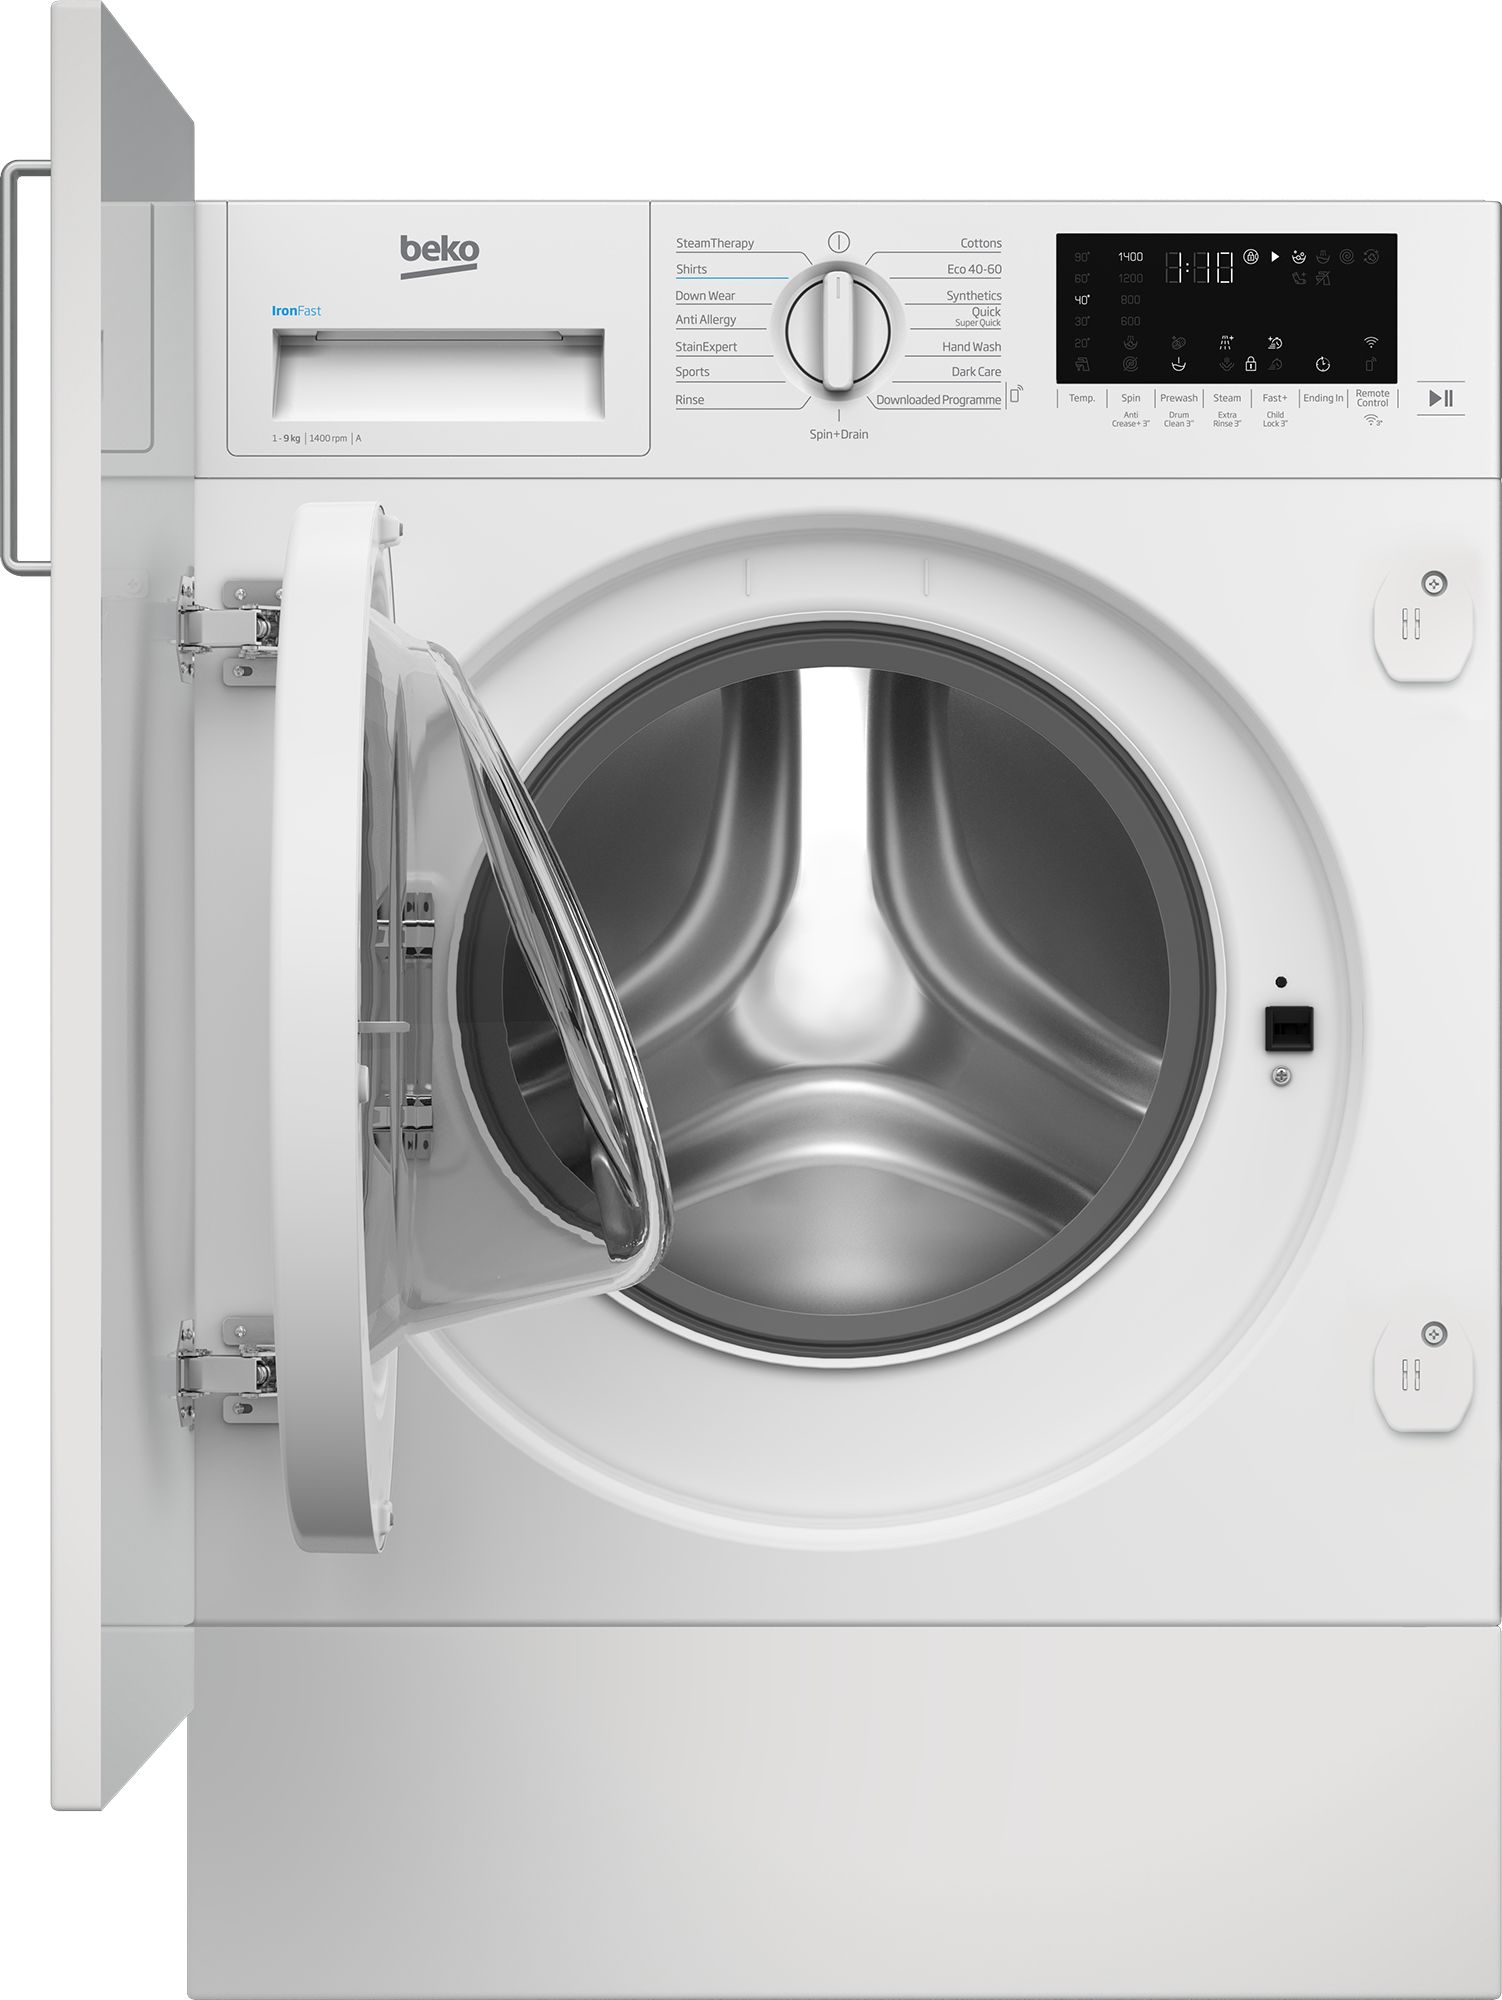 Beko RecycledTub WTIK94121F Integrated 9kg Washing Machine with 1400 rpm - White - A Rated, White